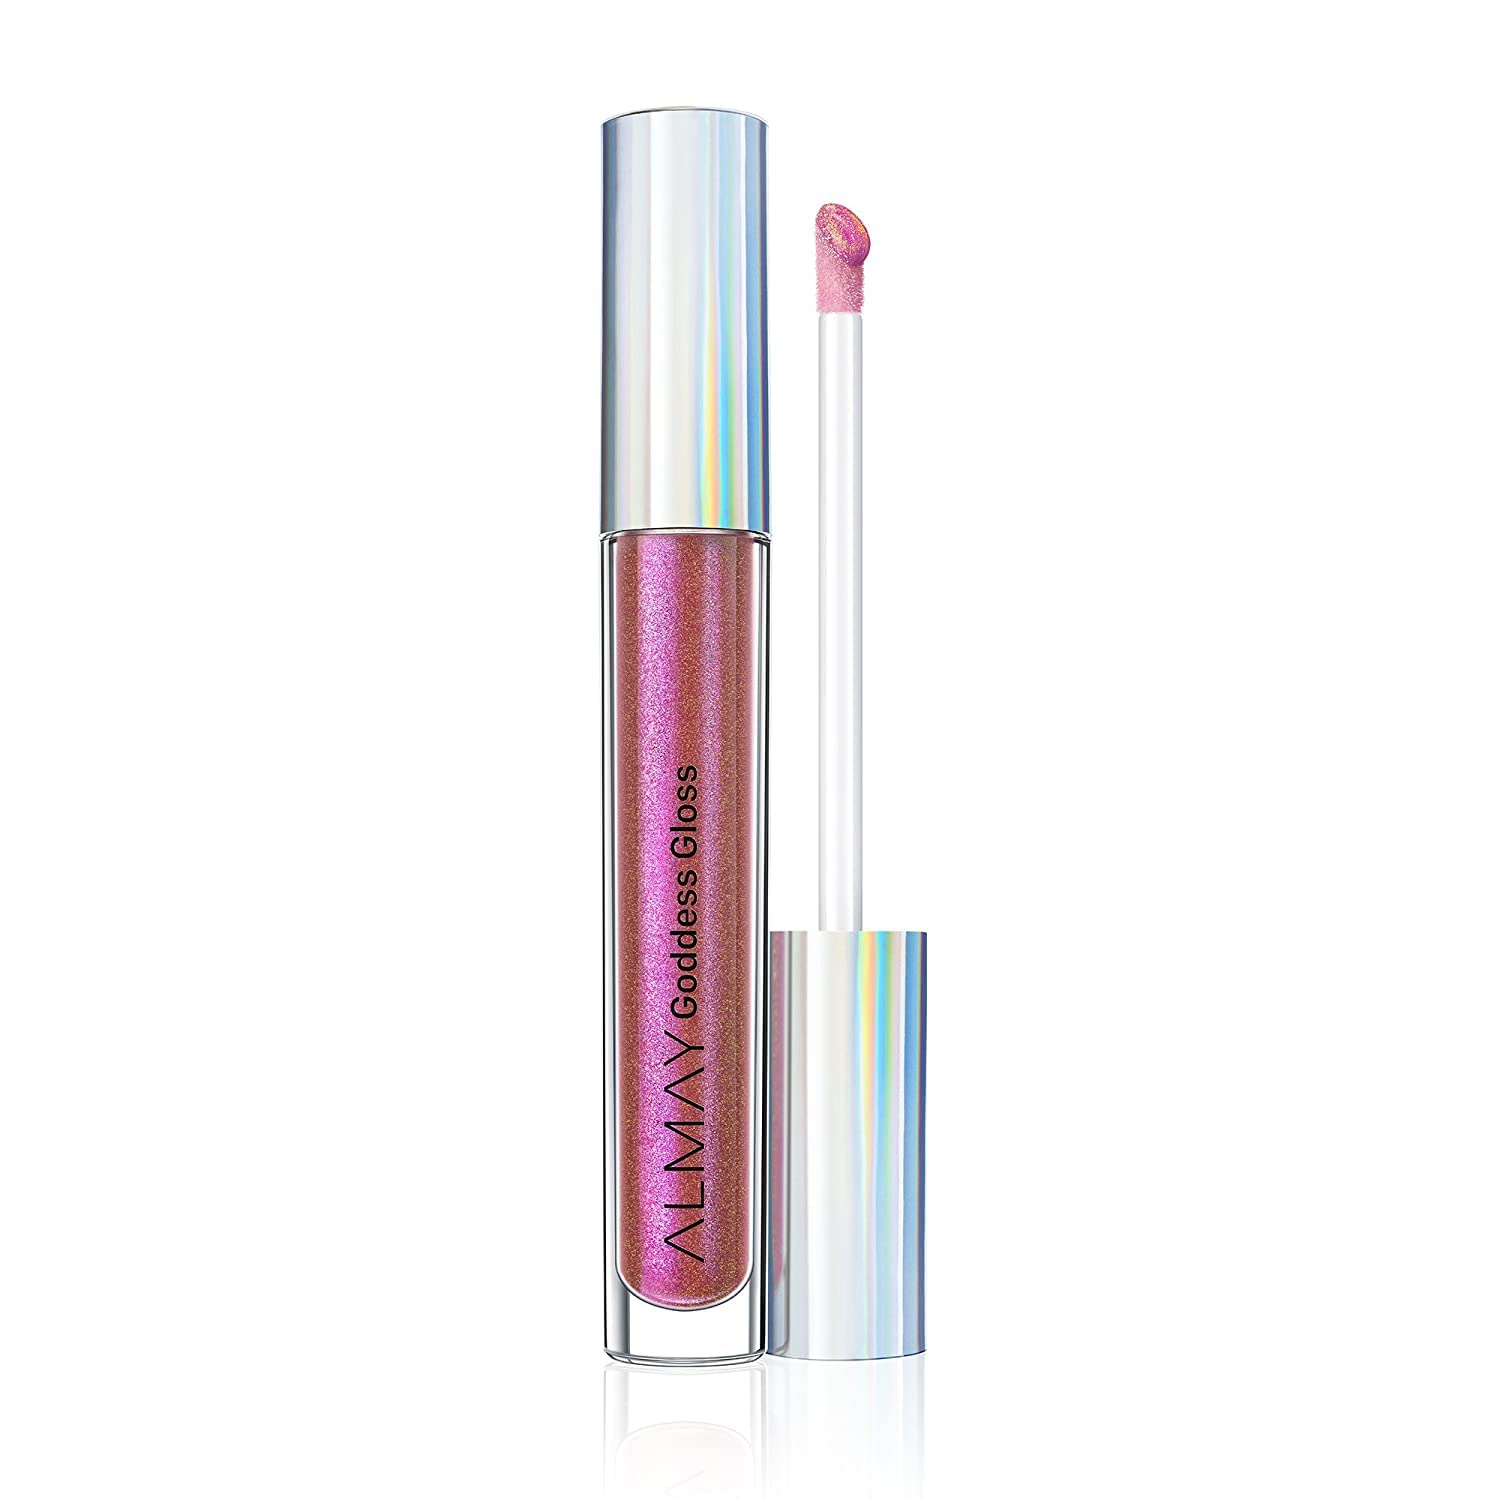 0.9-Oz Almay Goddess Lip Gloss (Flame) $2.28 w/ S&S + Free Shipping w/ Prime or on $35+